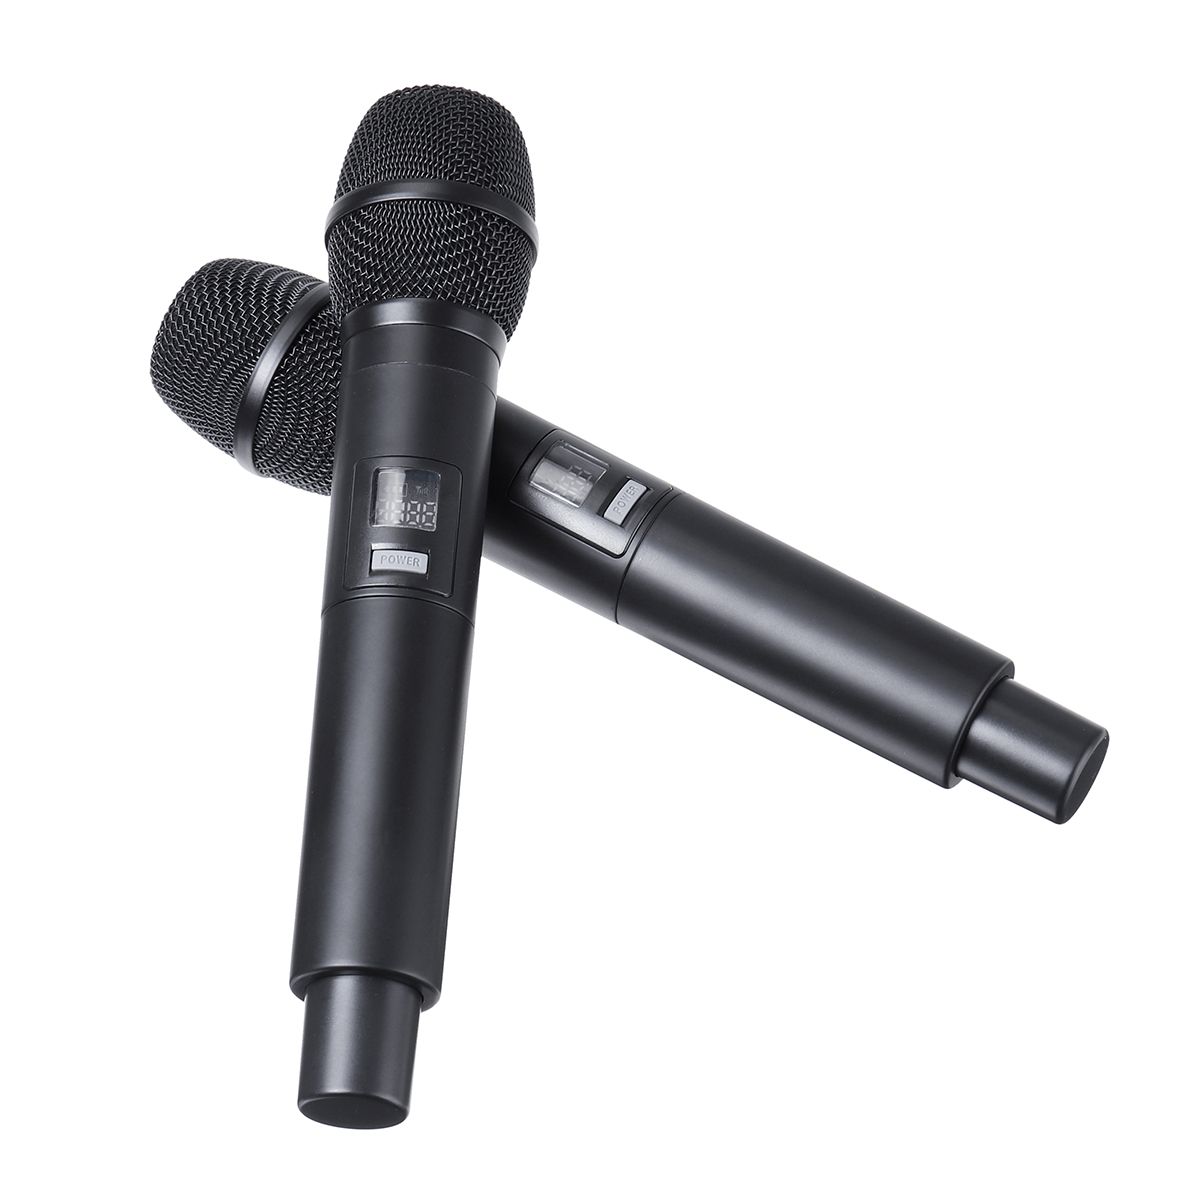 UW-01-UHF-Wireless-Microphone-System-Handheld-LED-Mic-with-Receiver-1617346